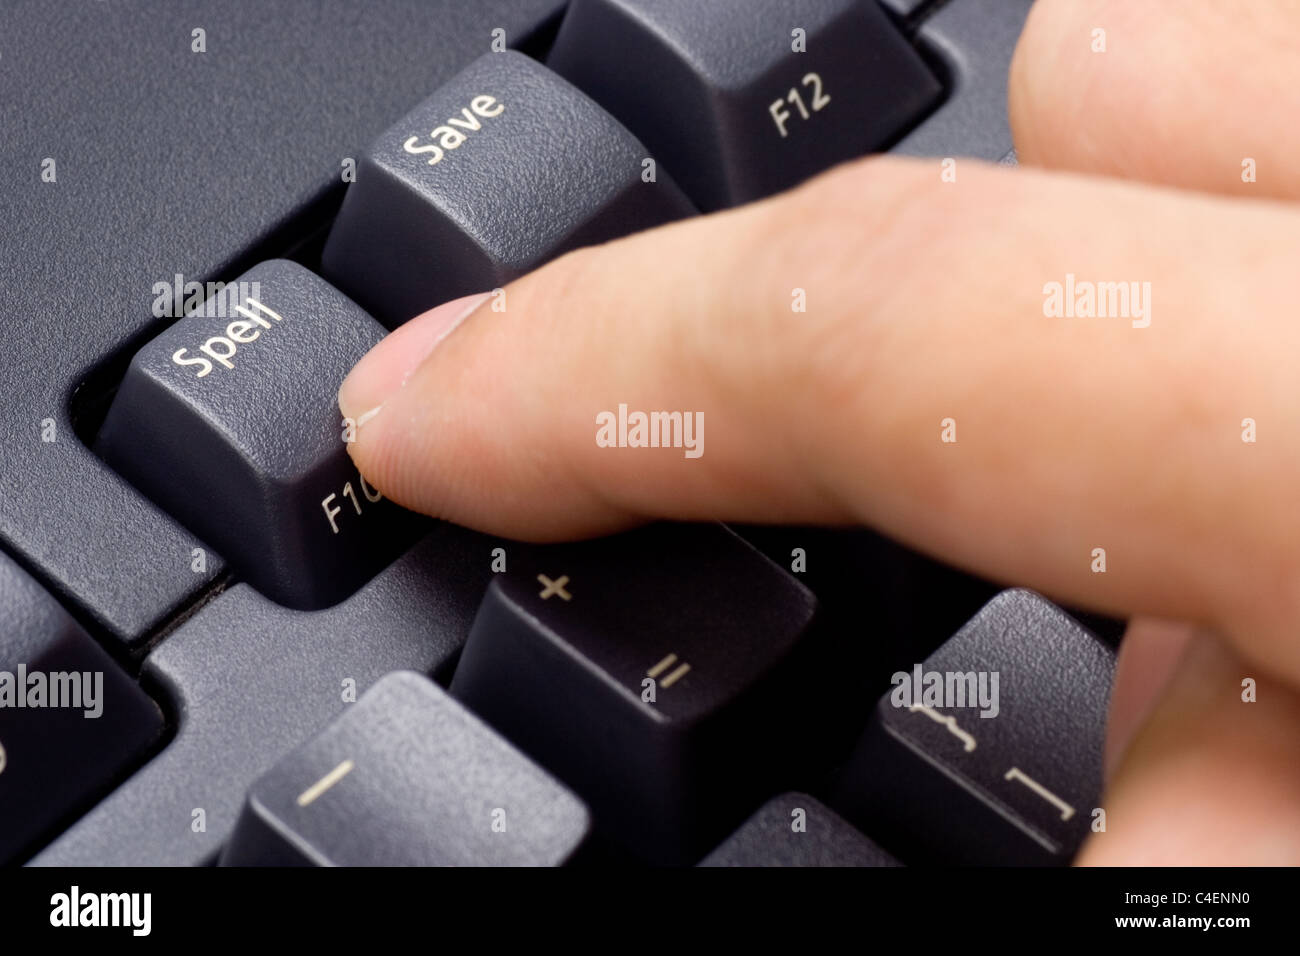 Closeup of a finger pressing SPELL button on a keyboard Stock Photo